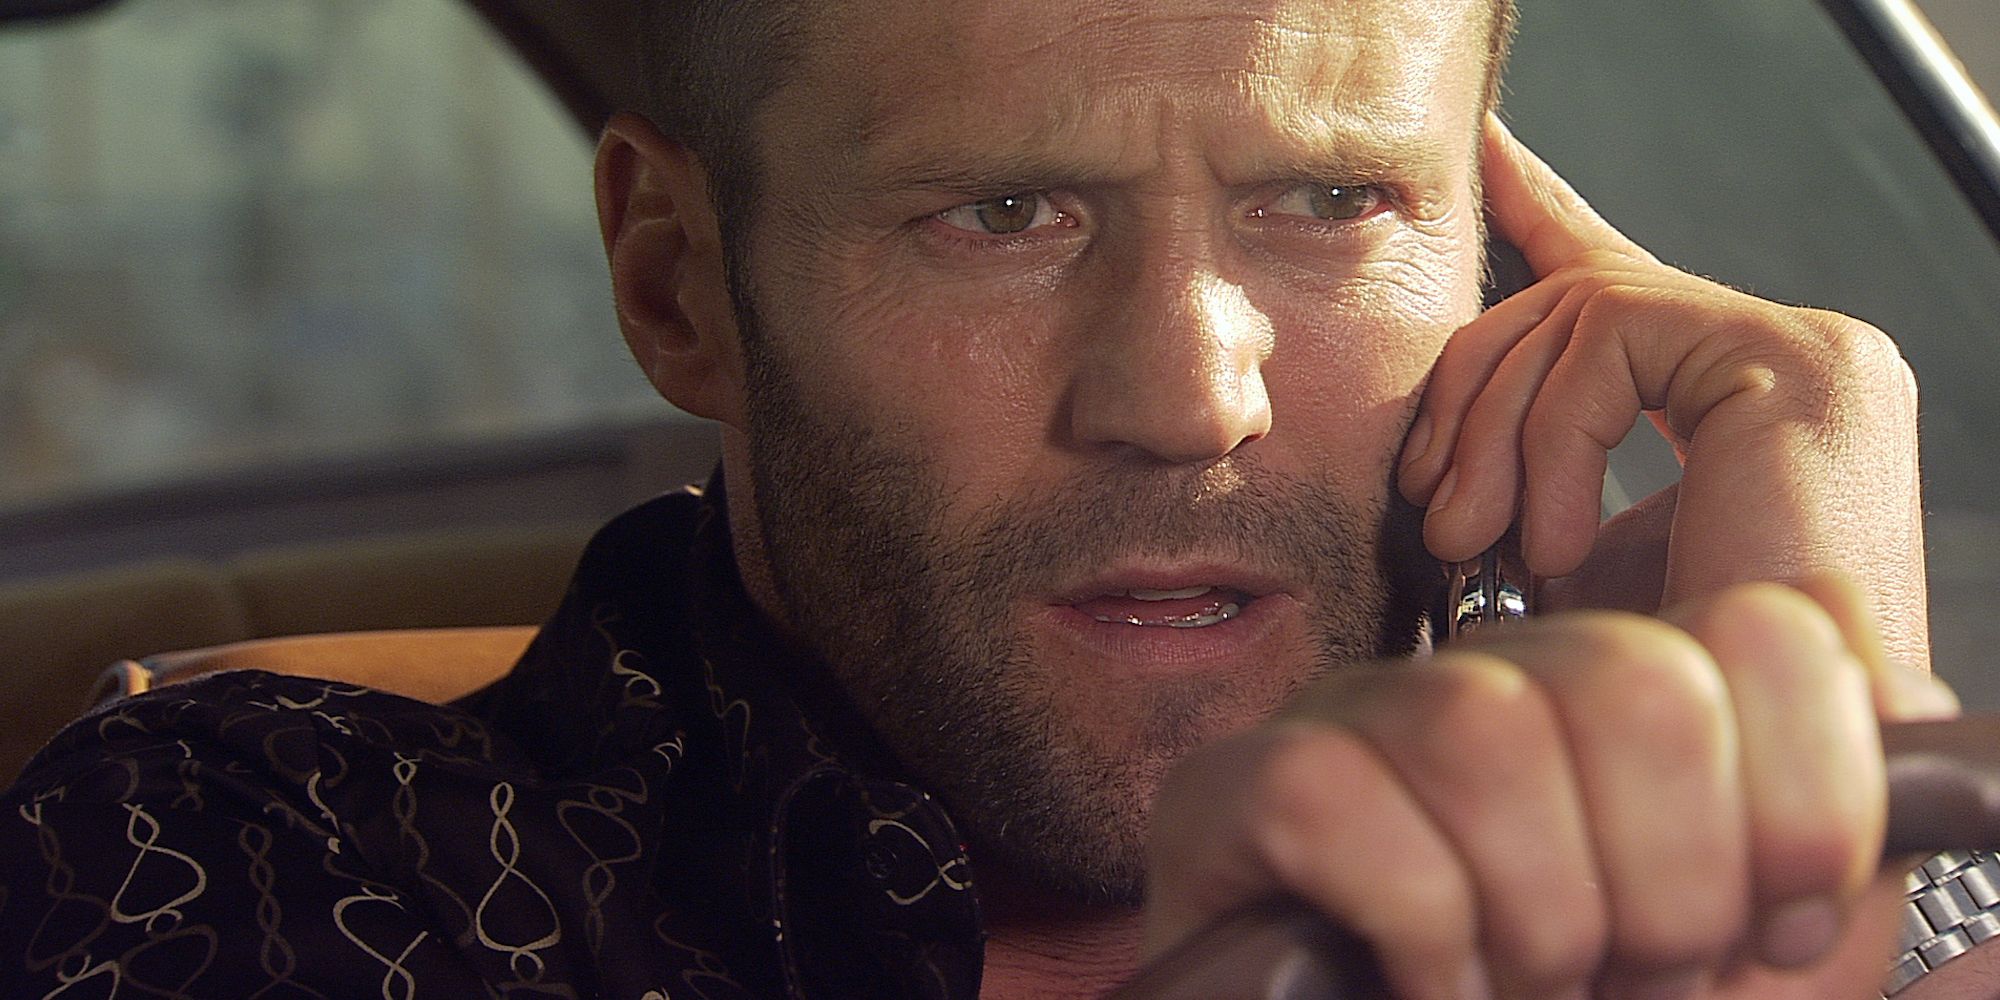 Jason Statham driving while talking on a cellphone as Chev in Crank.